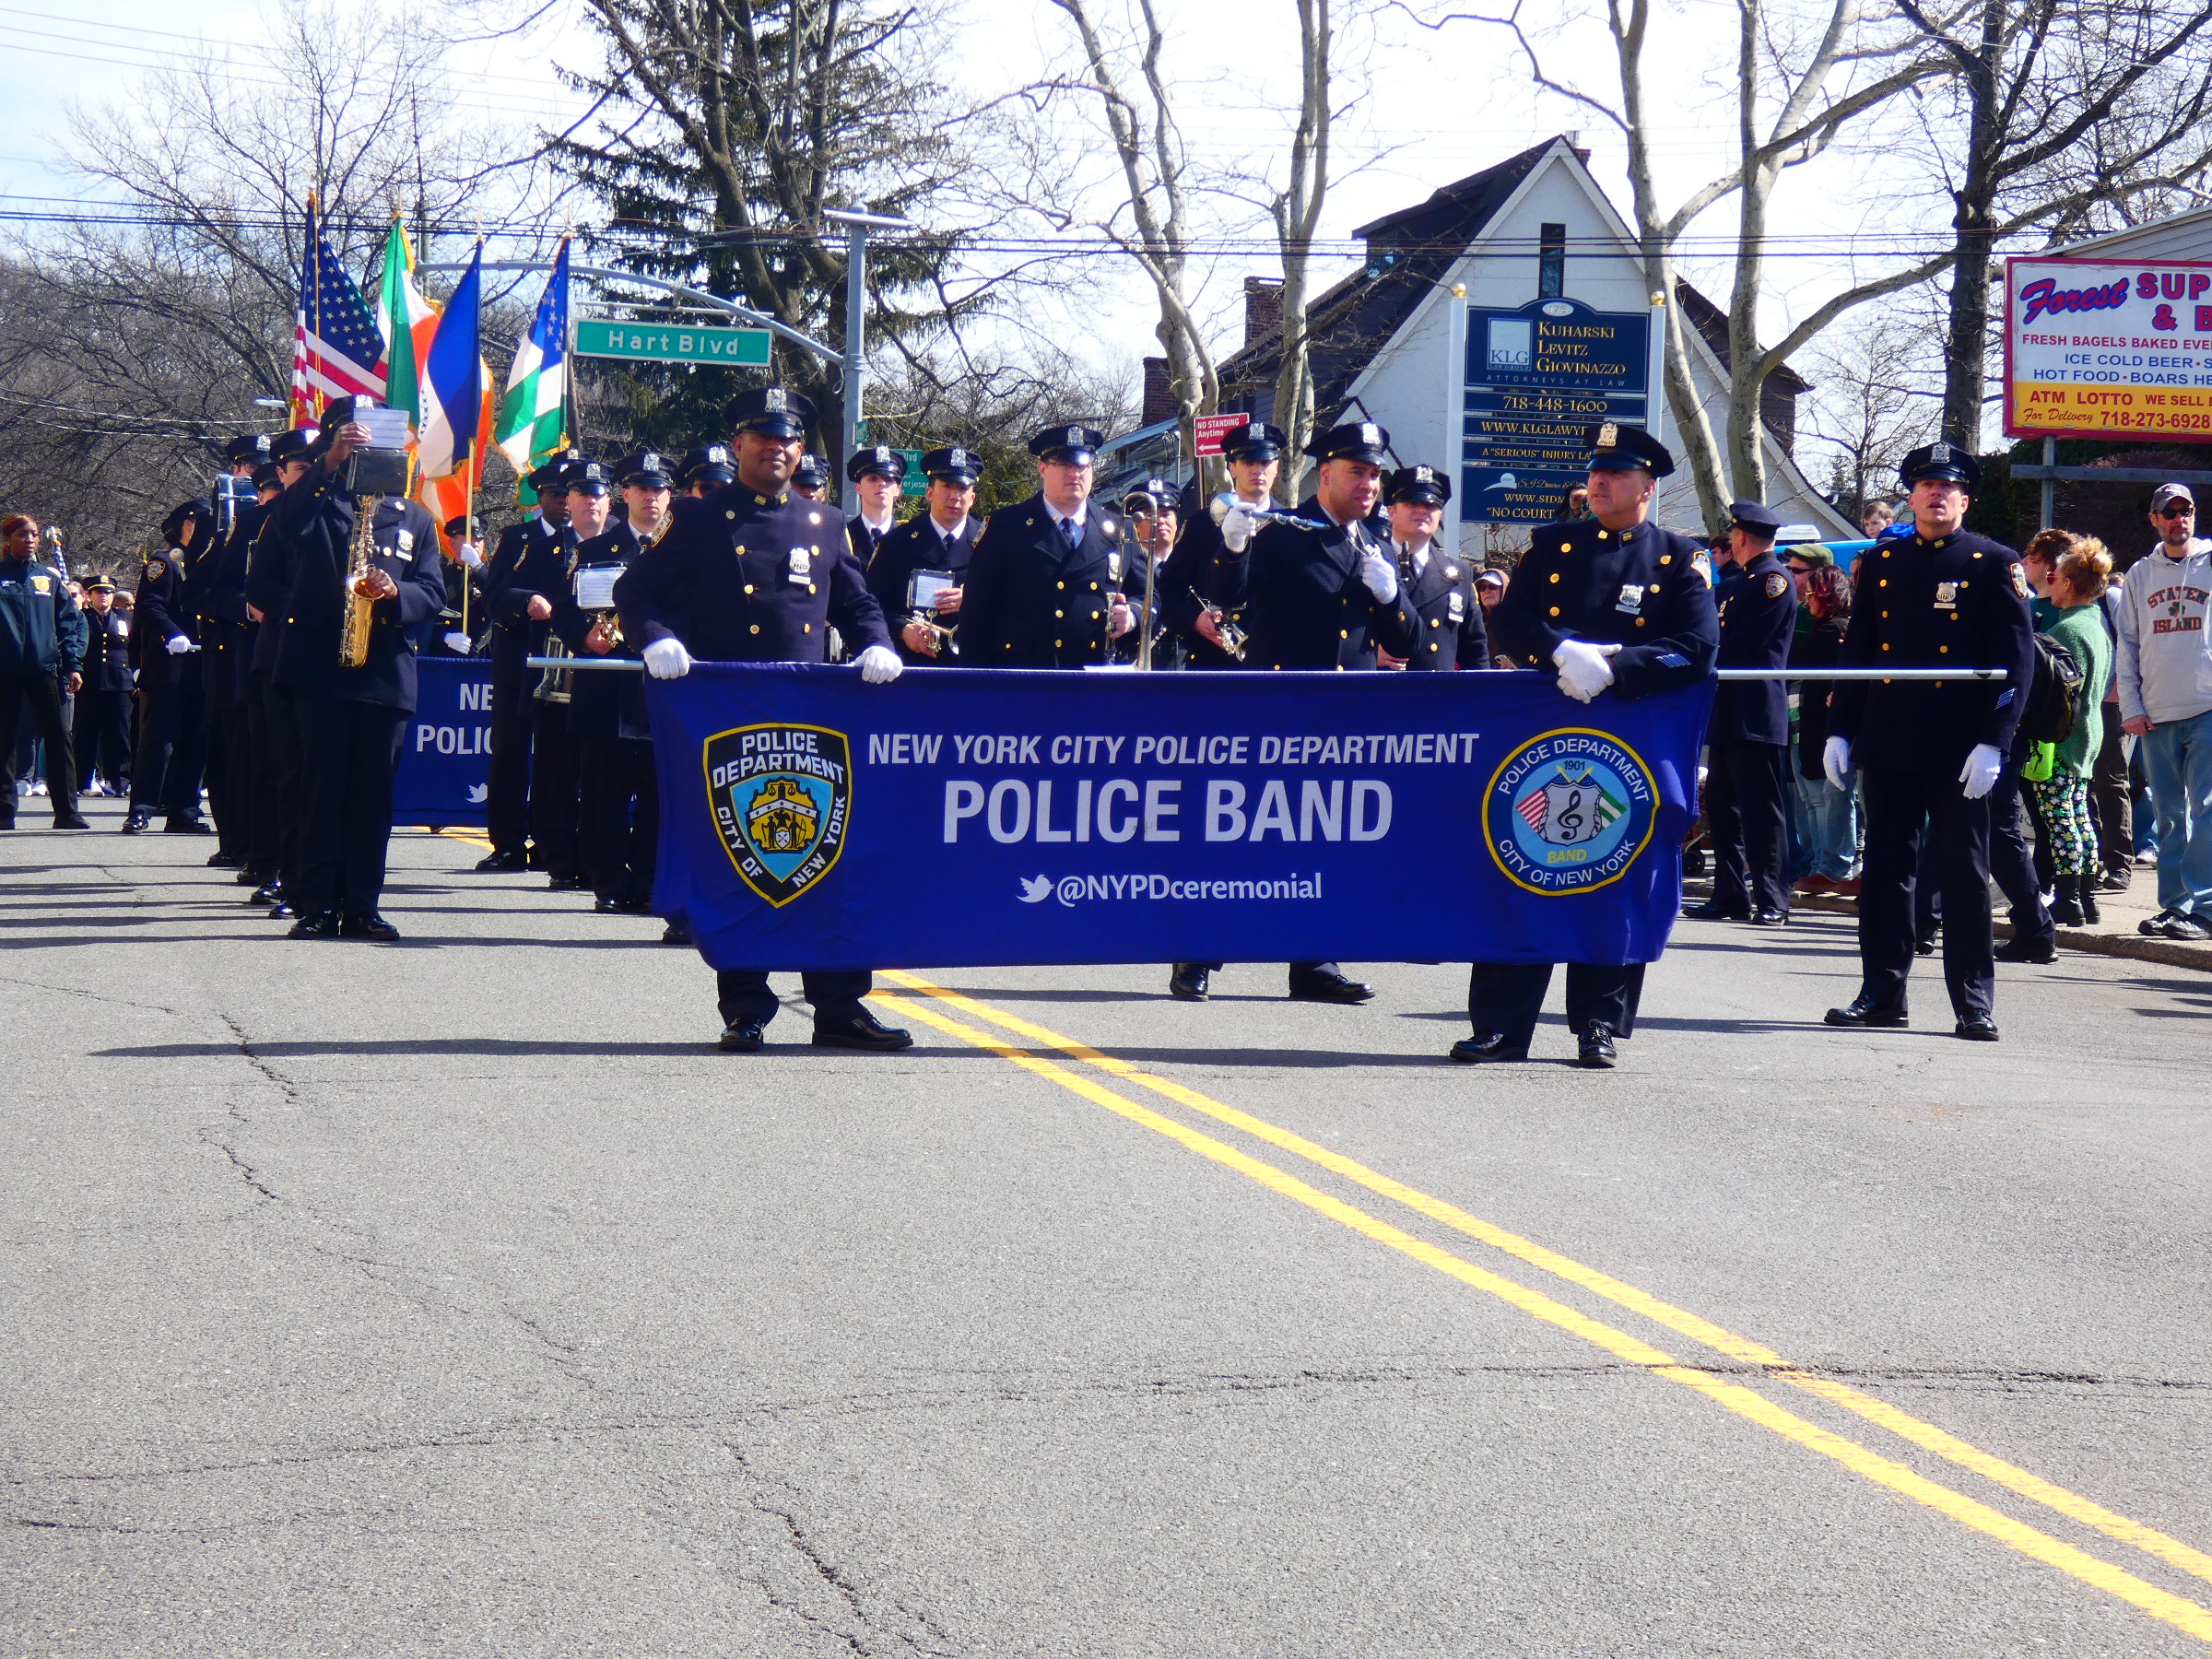 The NYPD Police Band